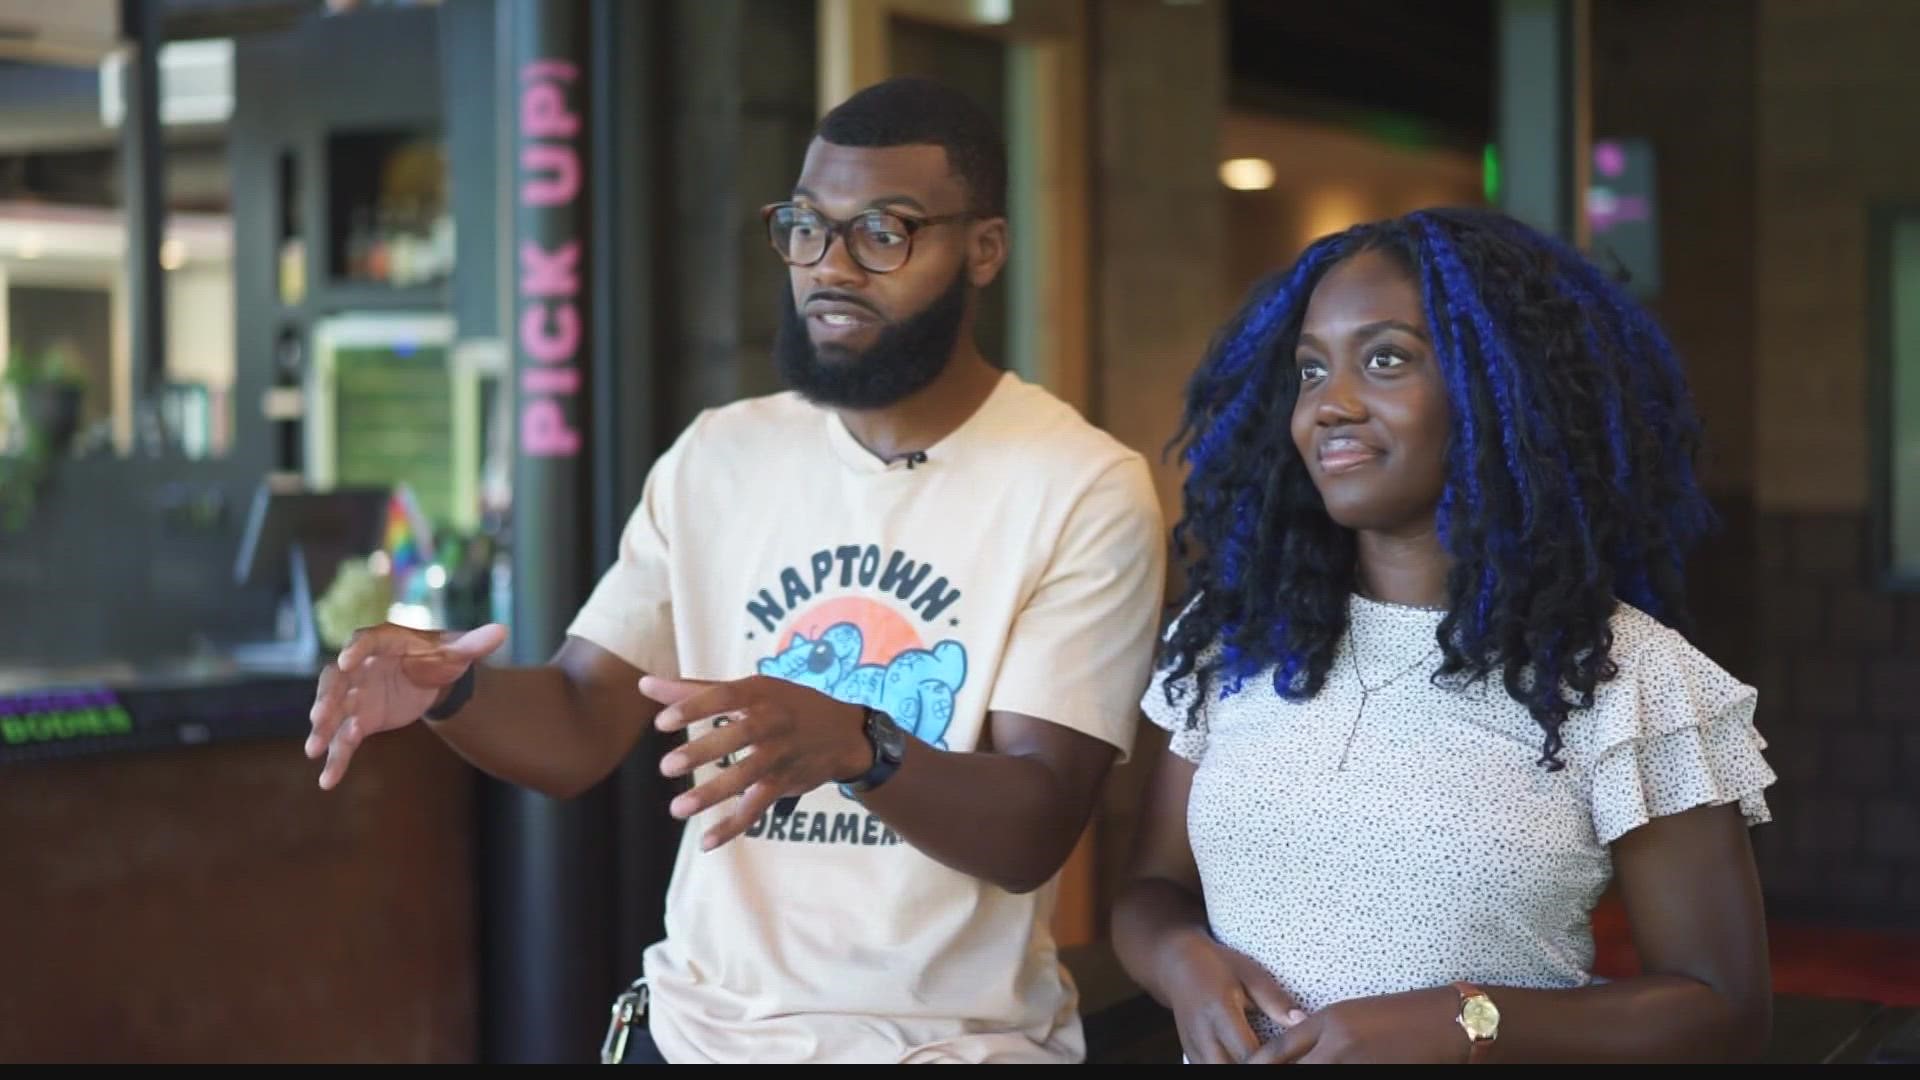 Loving Life Productions and Circle City Storytellers teamed up to create "Naptown Narratives," which highlights Indy black culture through storytelling.